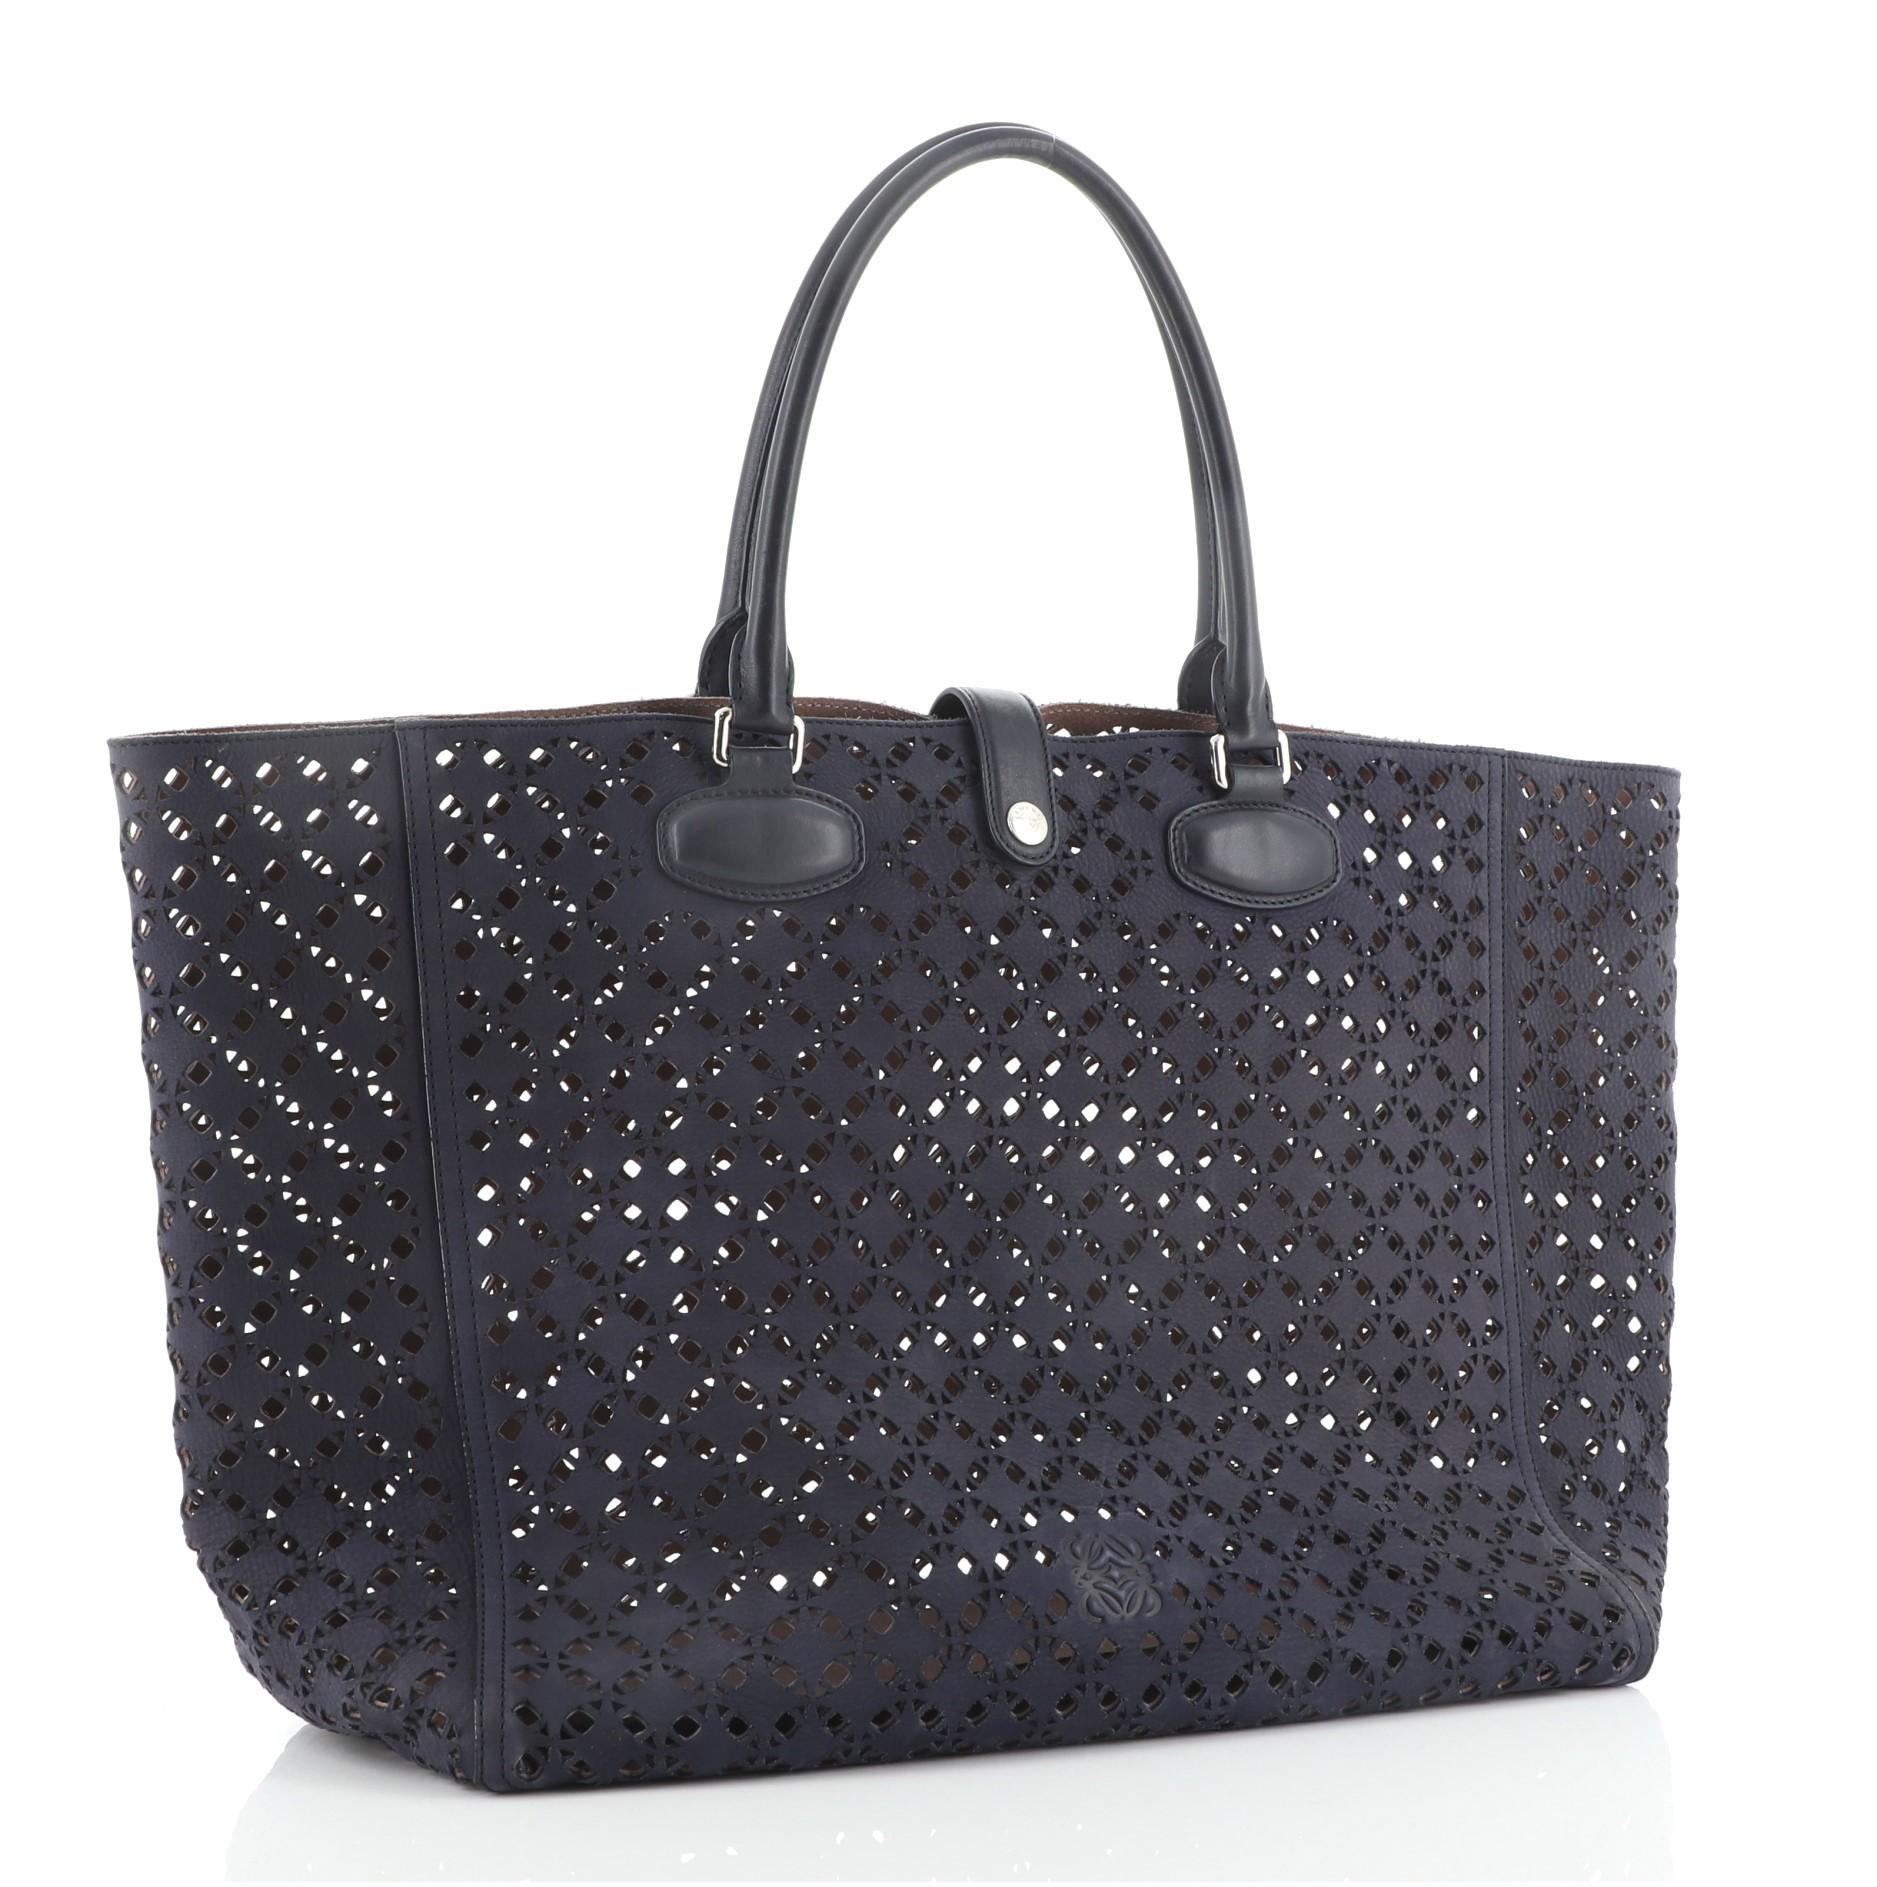 Loewe Leo Shopper Tote Laser Cut Suede Large
Blue

Condition Details: Moderate wear on base, wear on opening, handles, closure trim and pochette. Scuffs on base, minor cracking on base shaper wax edges, scratches on hardware.

51946MSC

Height 